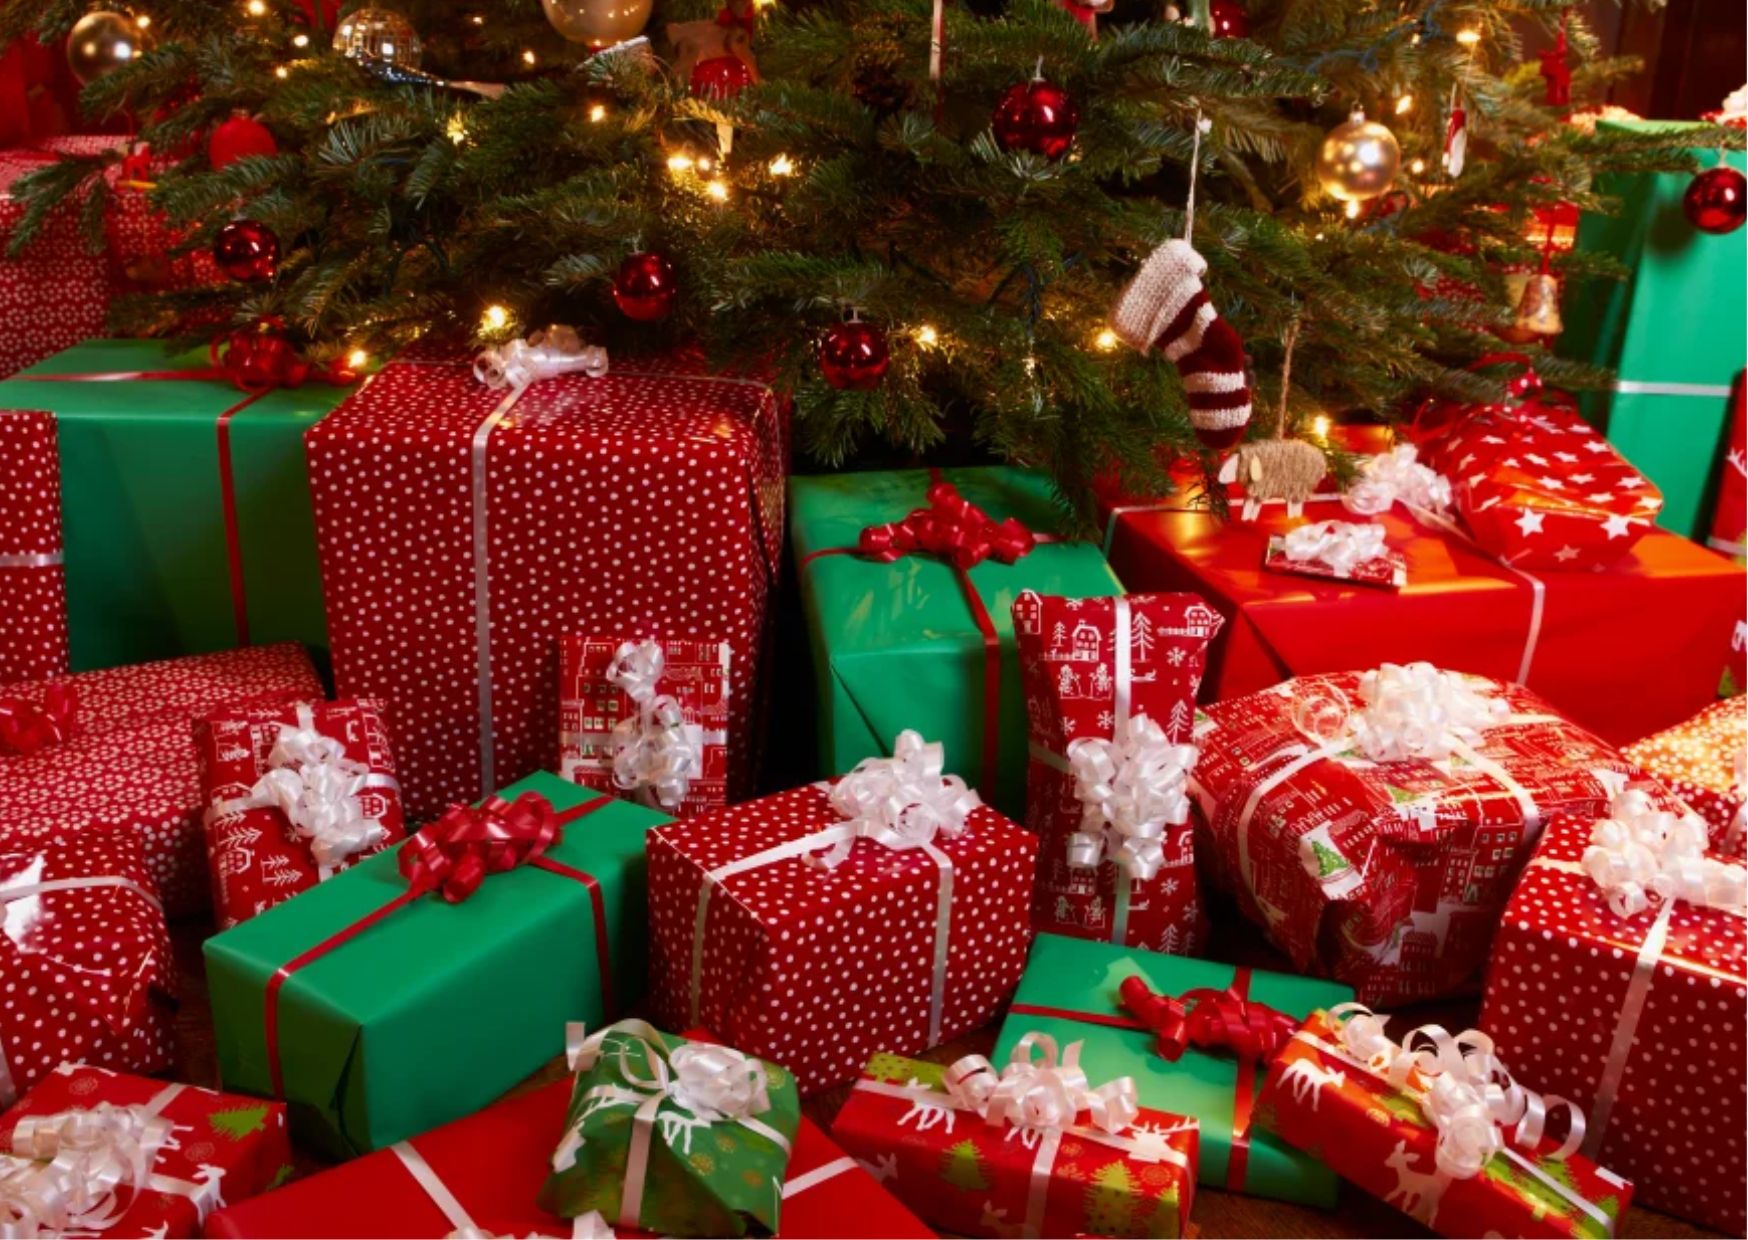 Top 10 Websites for Buying Christmas Gifts